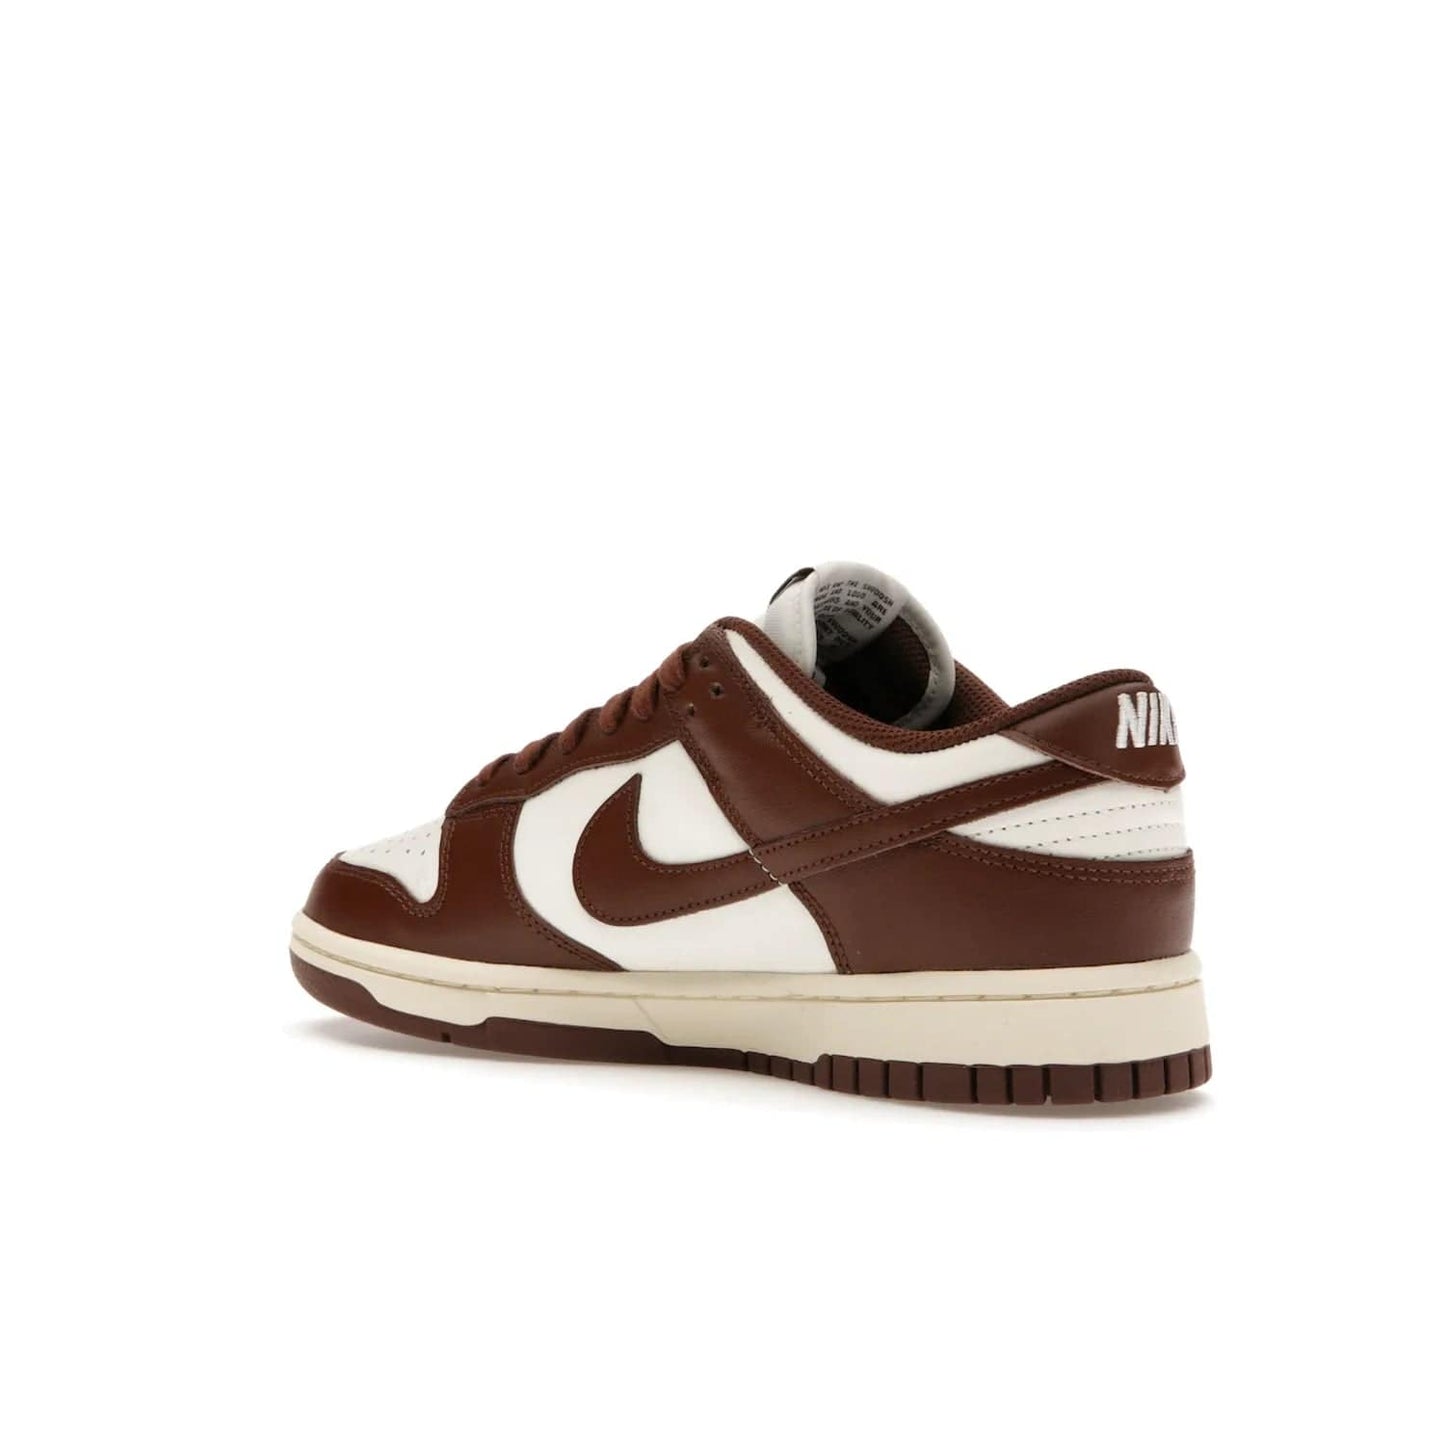 Nike Dunk Low Cacao Wow (Women's) - Image 23 - Only at www.BallersClubKickz.com - Revised
Get the Nike Dunk Low Cacao Wow and make a statement! Plush leather and a cool Cacao Wow finish bring together a unique mix of comfort and fashion that will turn heads. Boosted with a Coconut Milk hue. Shop today.